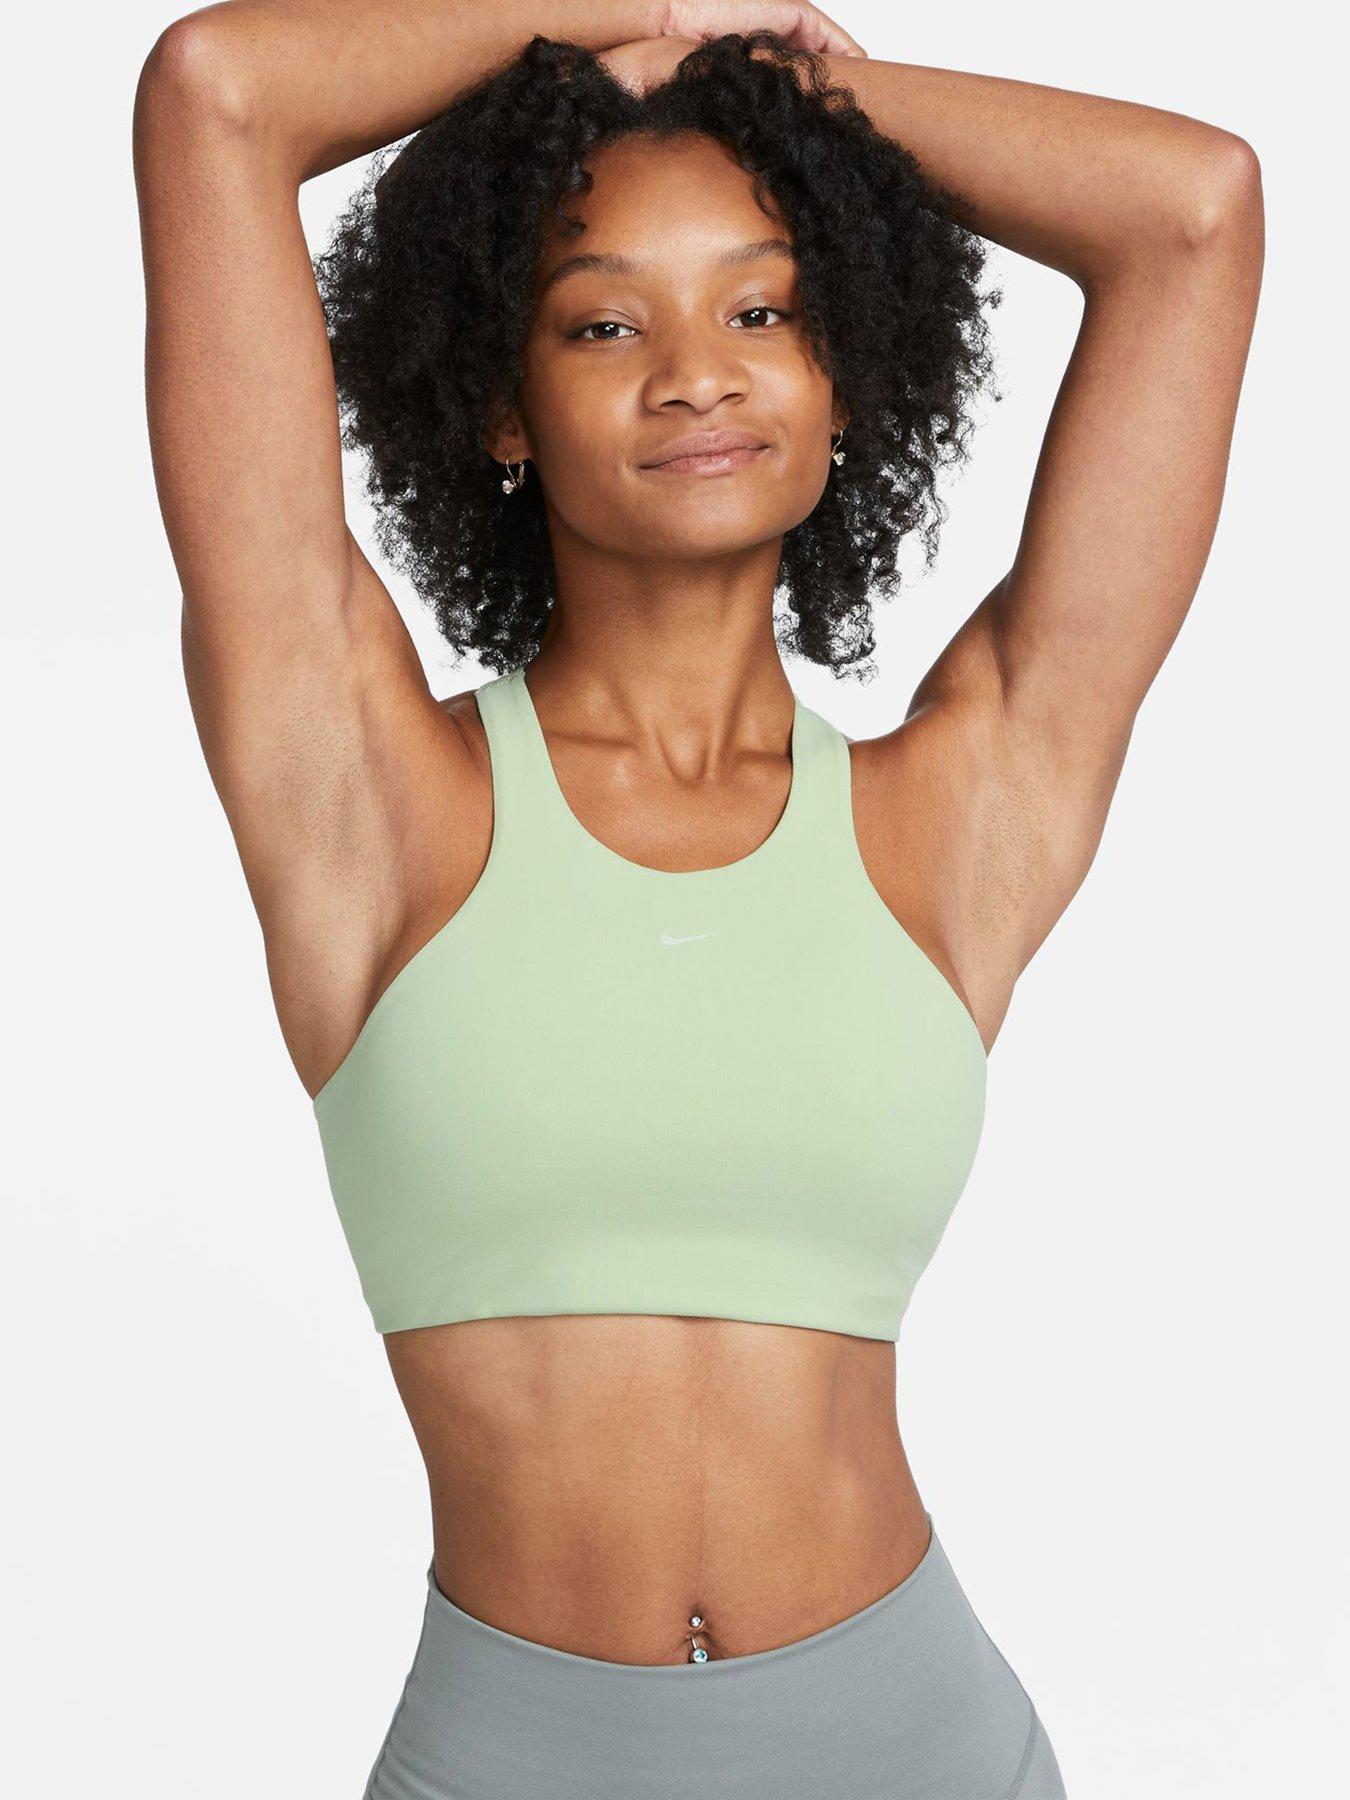 Nike Training Nike Yoga Indy light support layered sports bra in